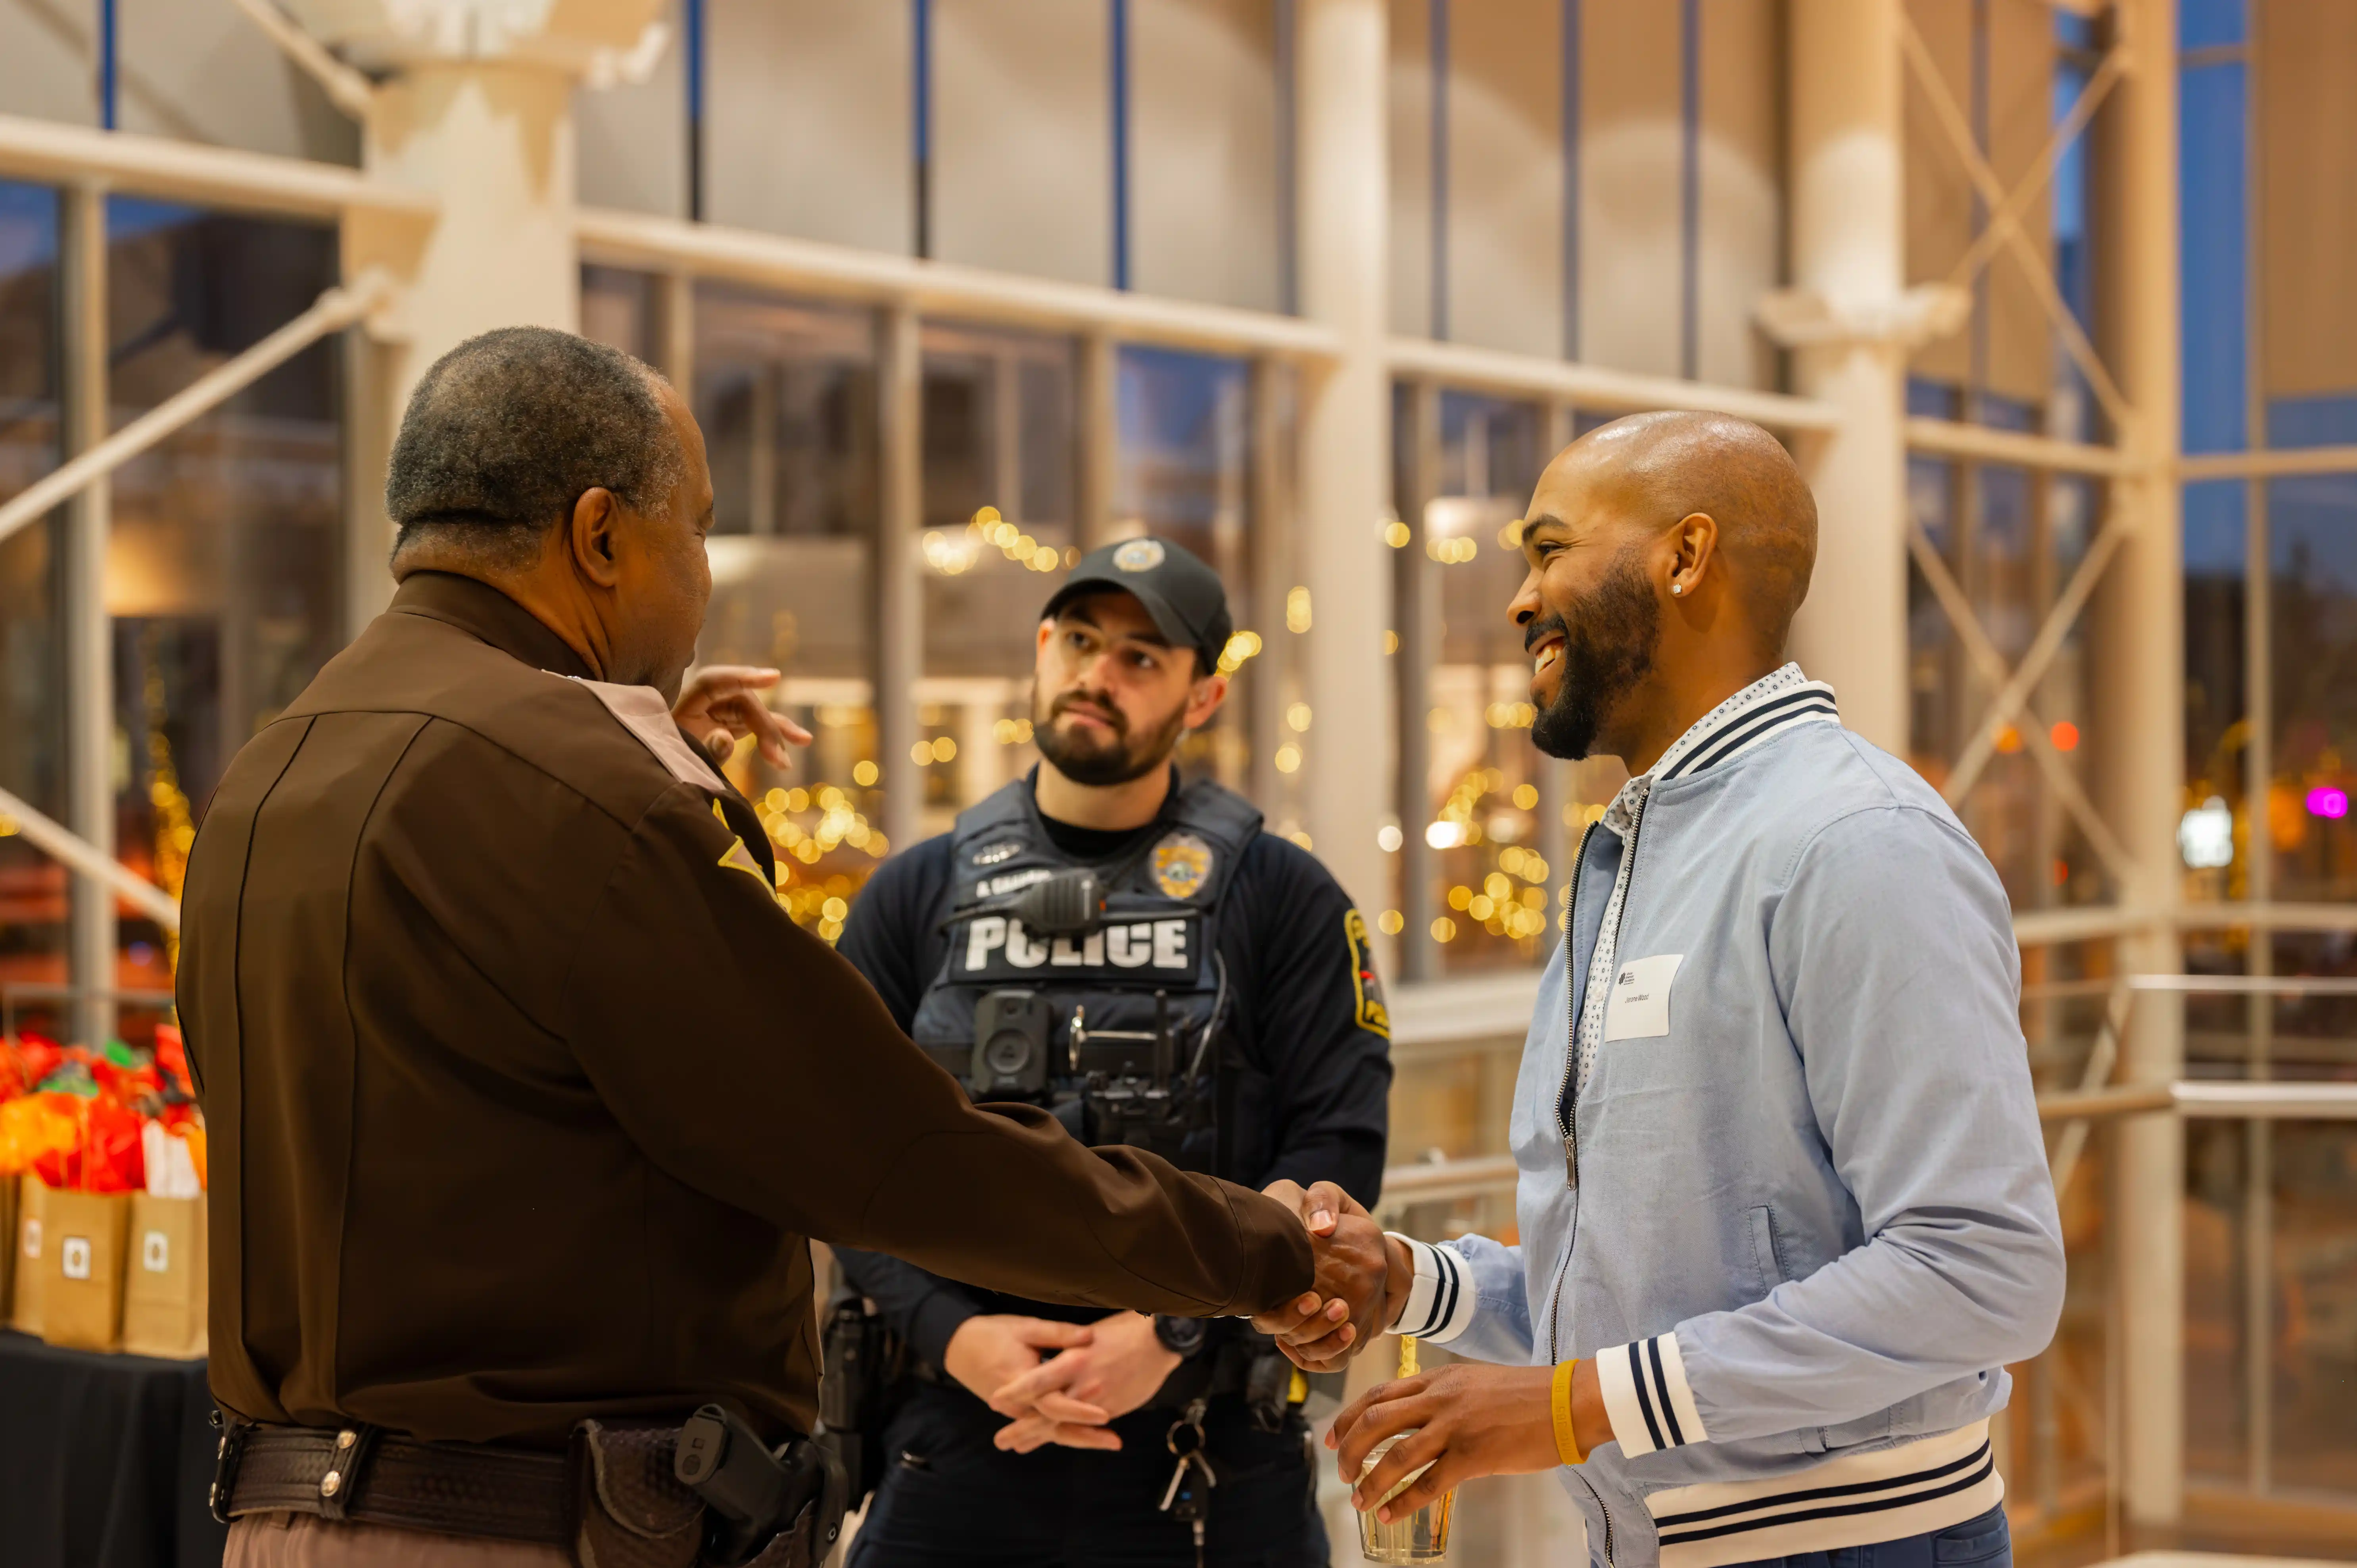 Two men shaking hands in a public indoor setting while another man in a police uniform observes.